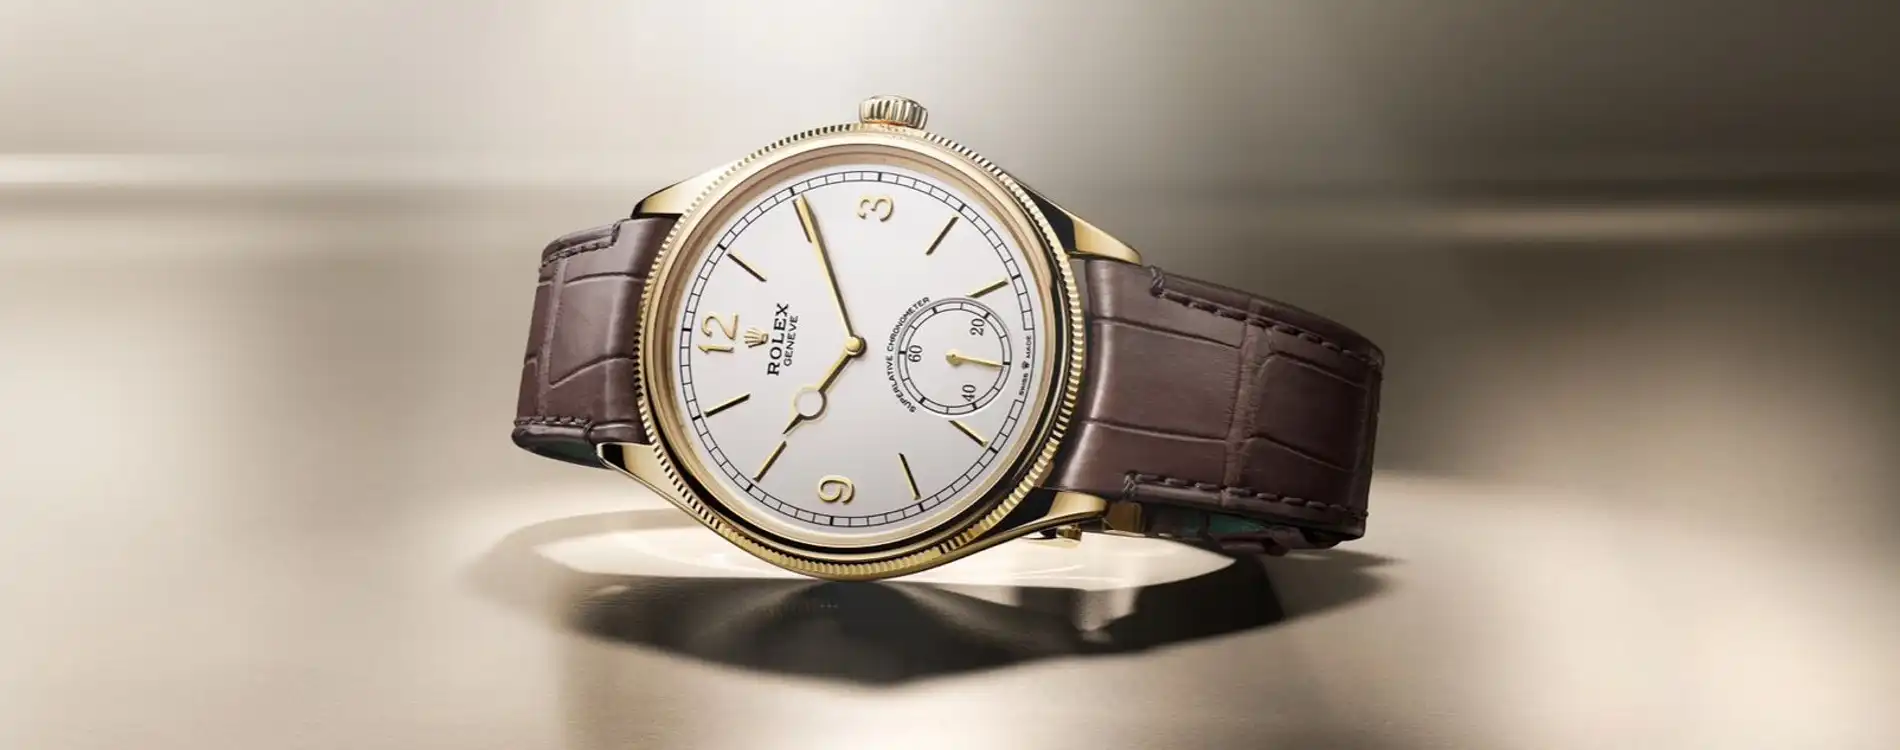 Most iconic and famous watches in the world | by Fabio Ponti | Medium